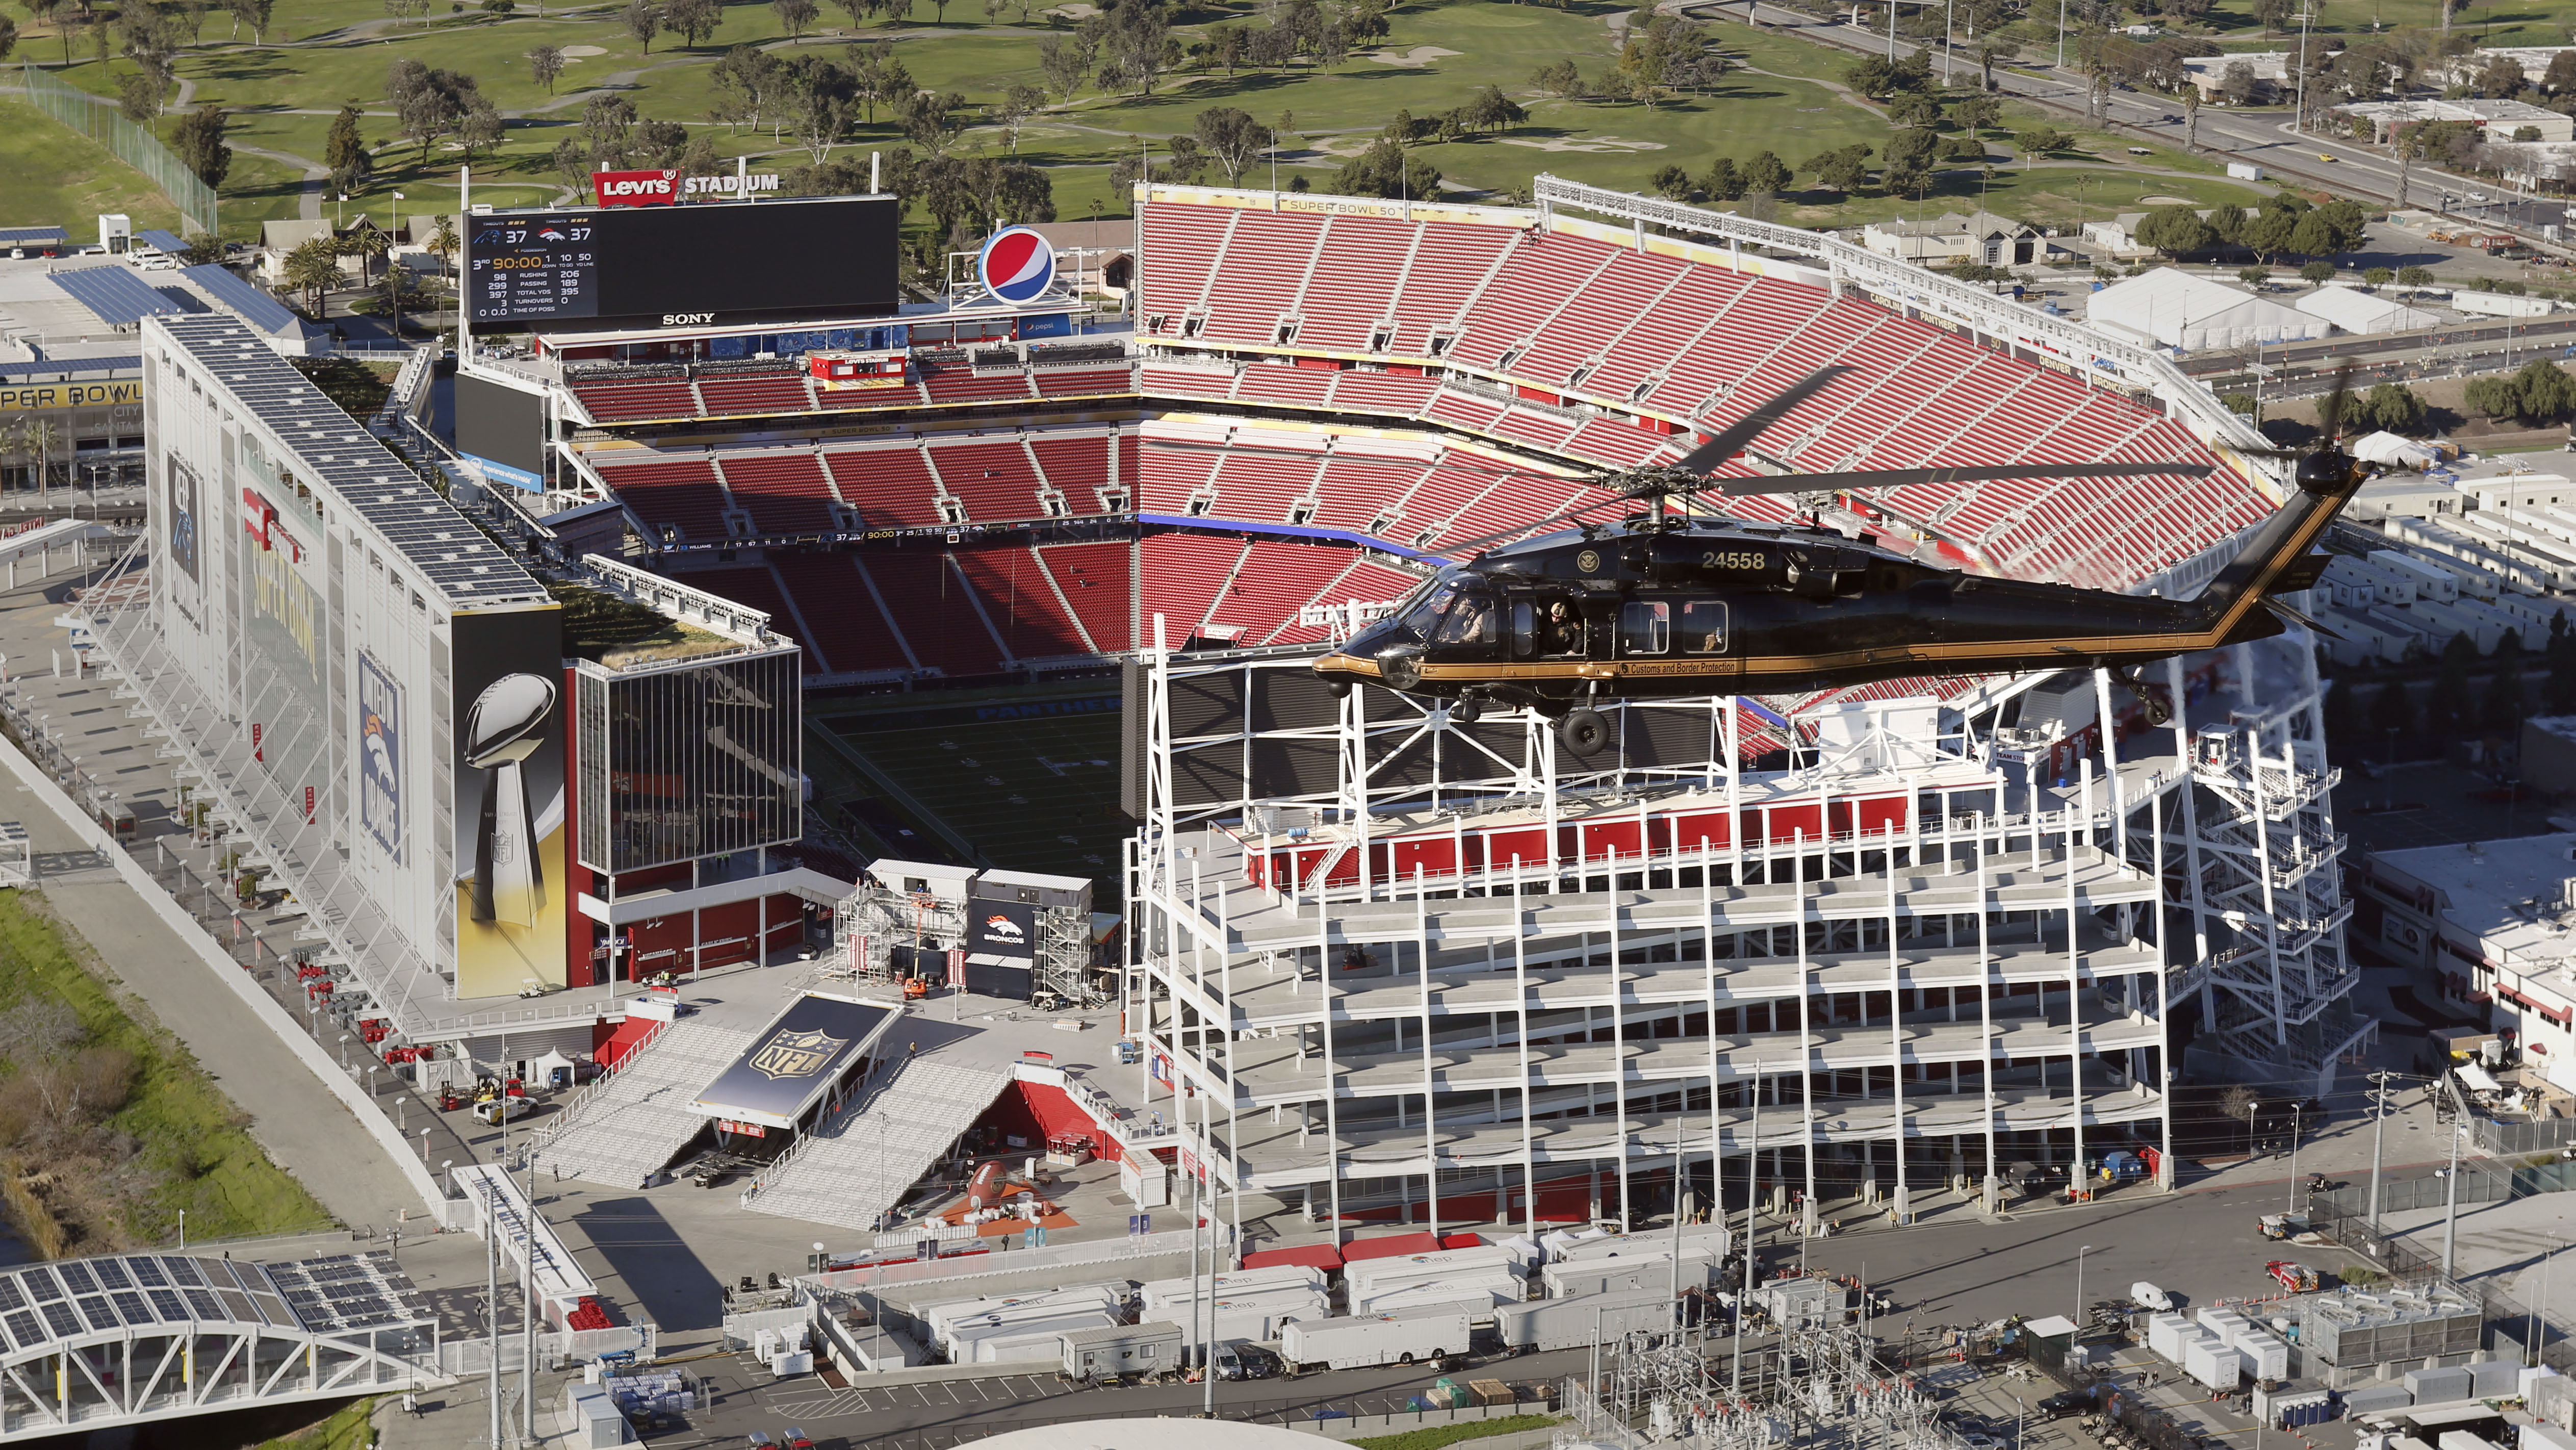 Top 37+ imagen how to get from downtown san francisco to levi’s stadium